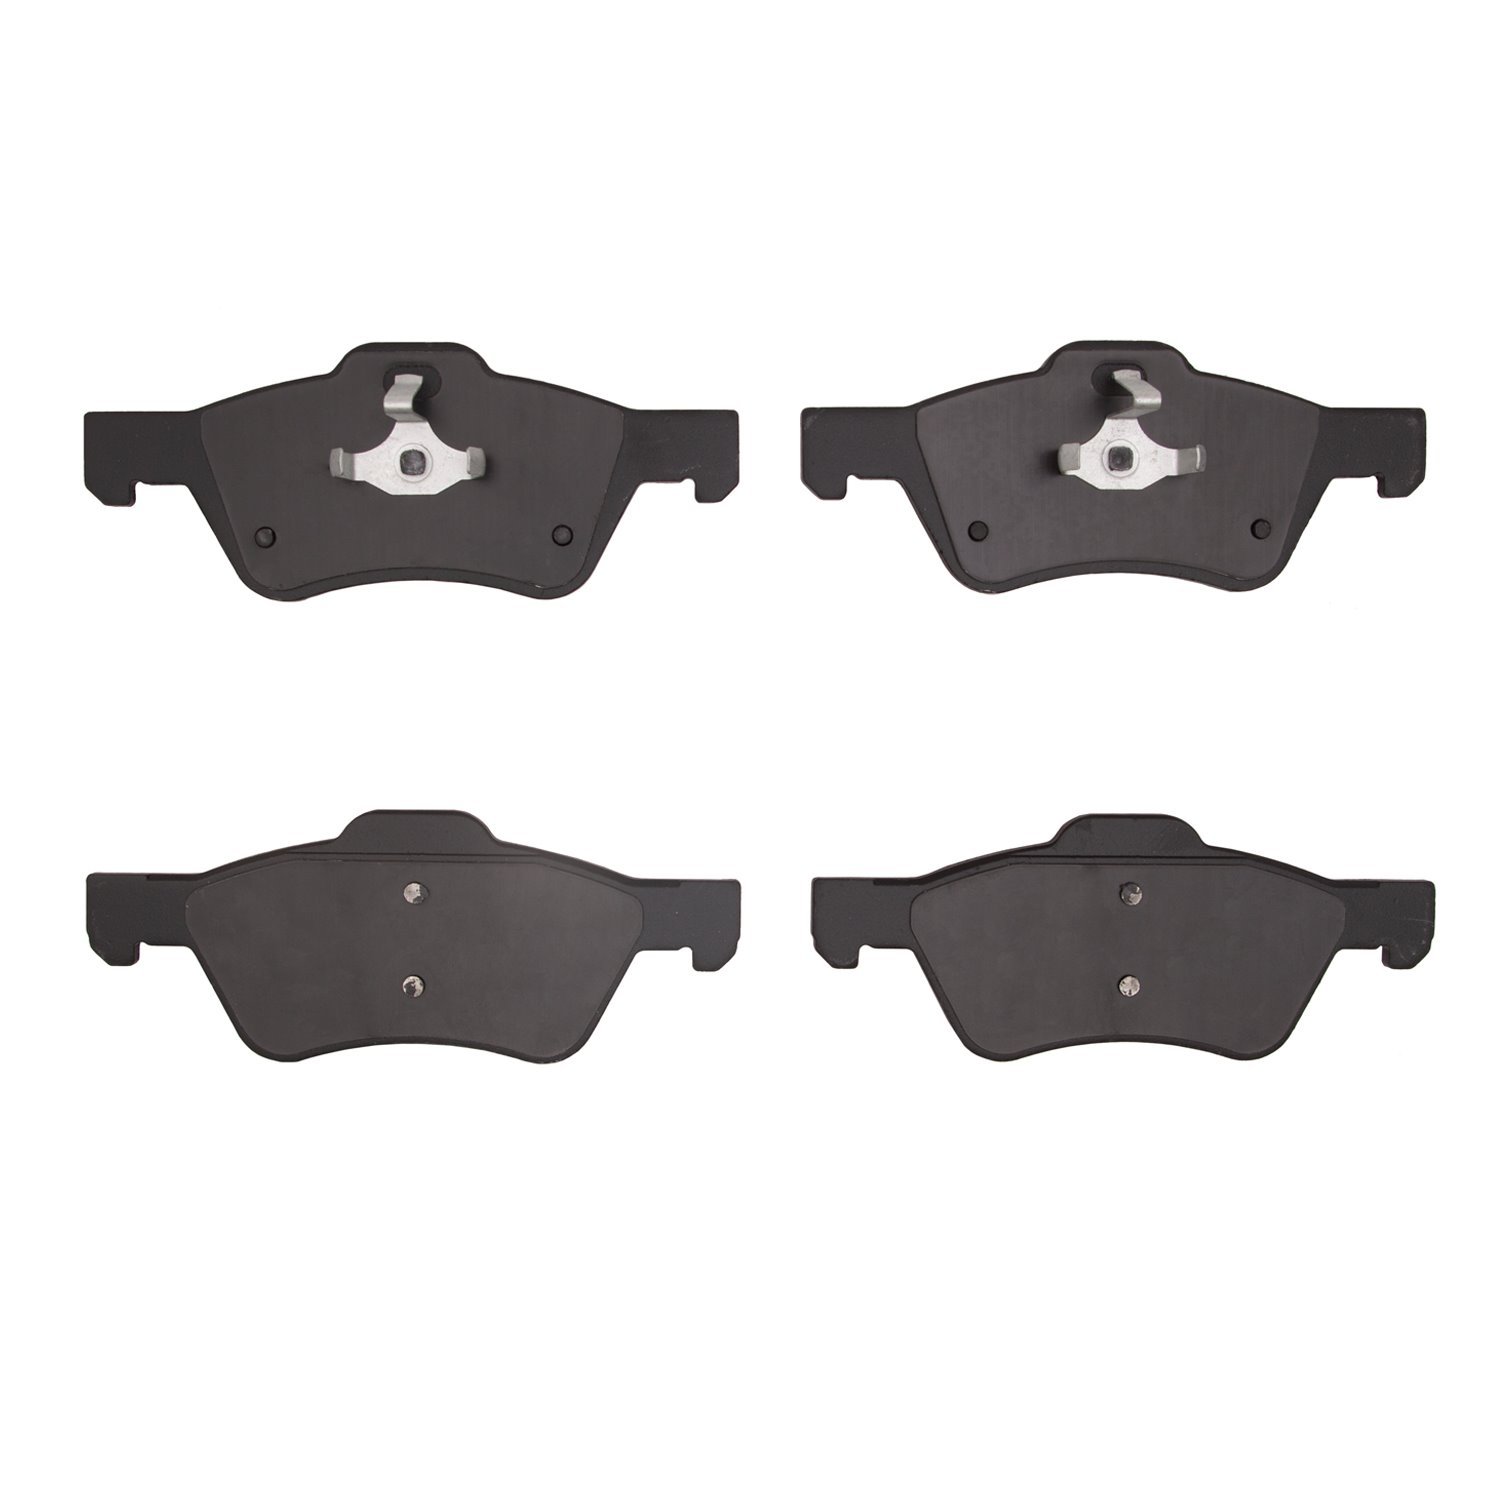 1310-1047-20 3000-Series Ceramic Brake Pads, 2009-2012 Ford/Lincoln/Mercury/Mazda, Position: Front